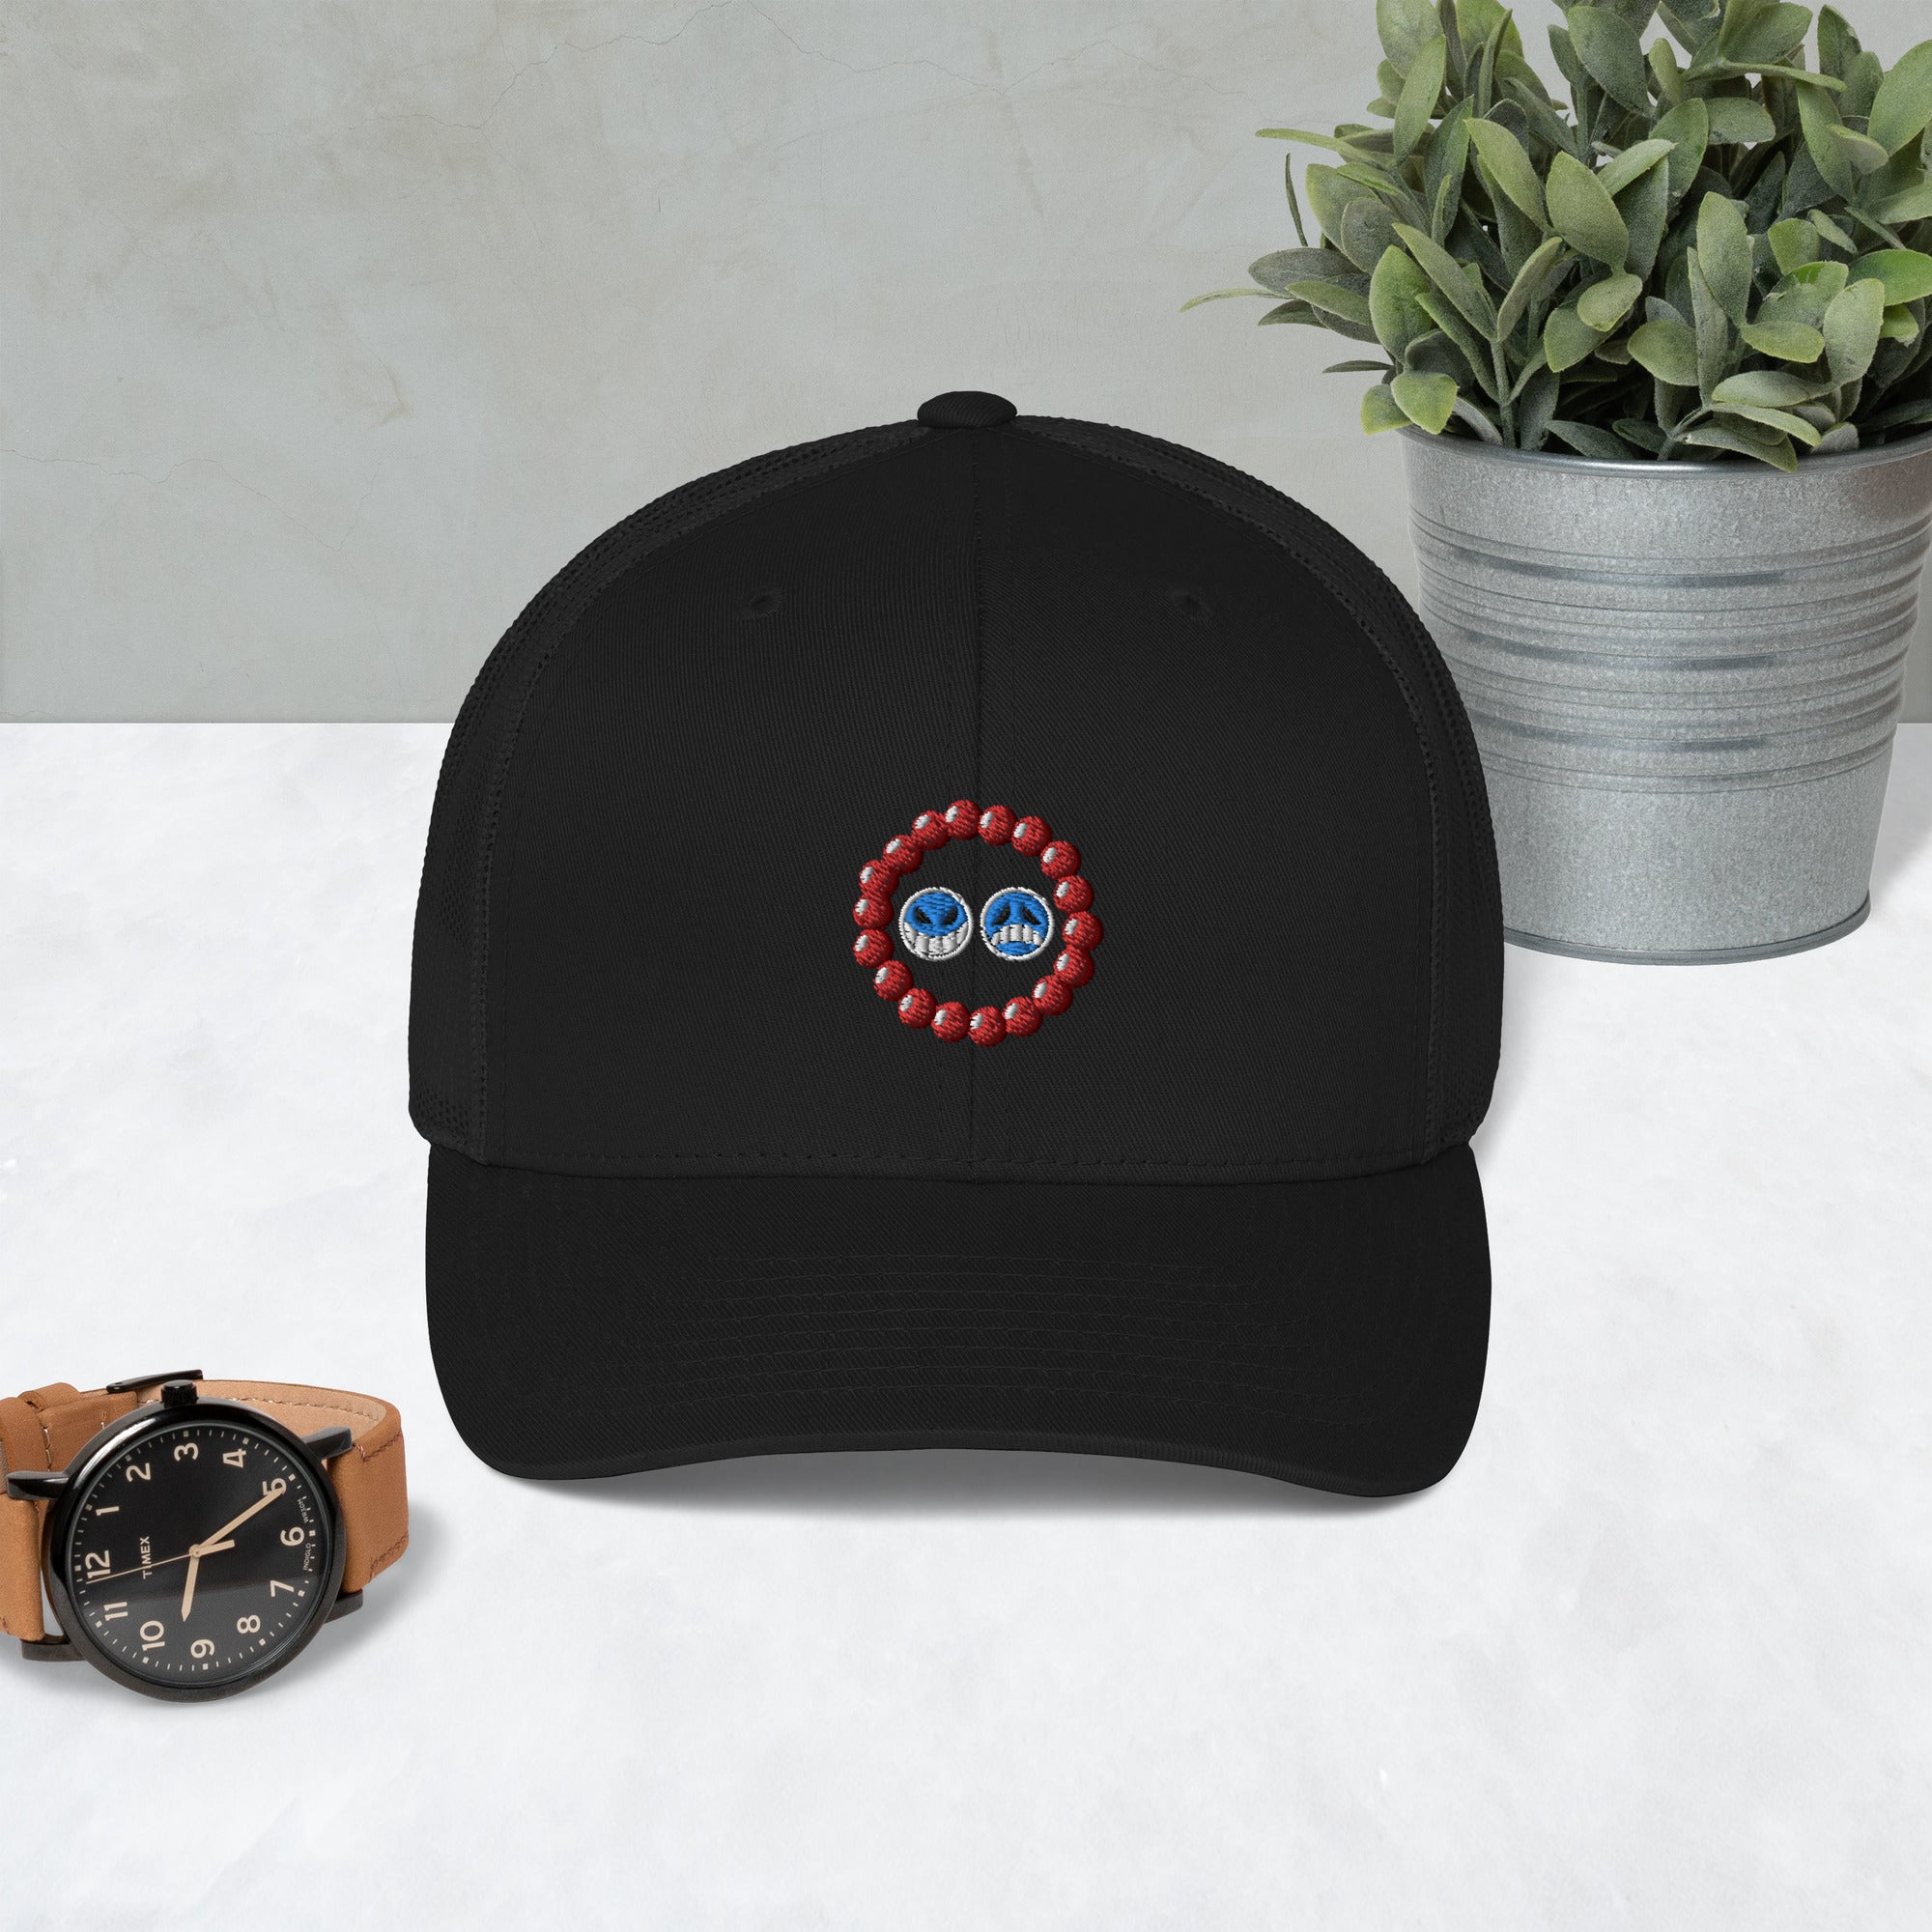 Ace Beads Anime Embroidered Trucker Hat